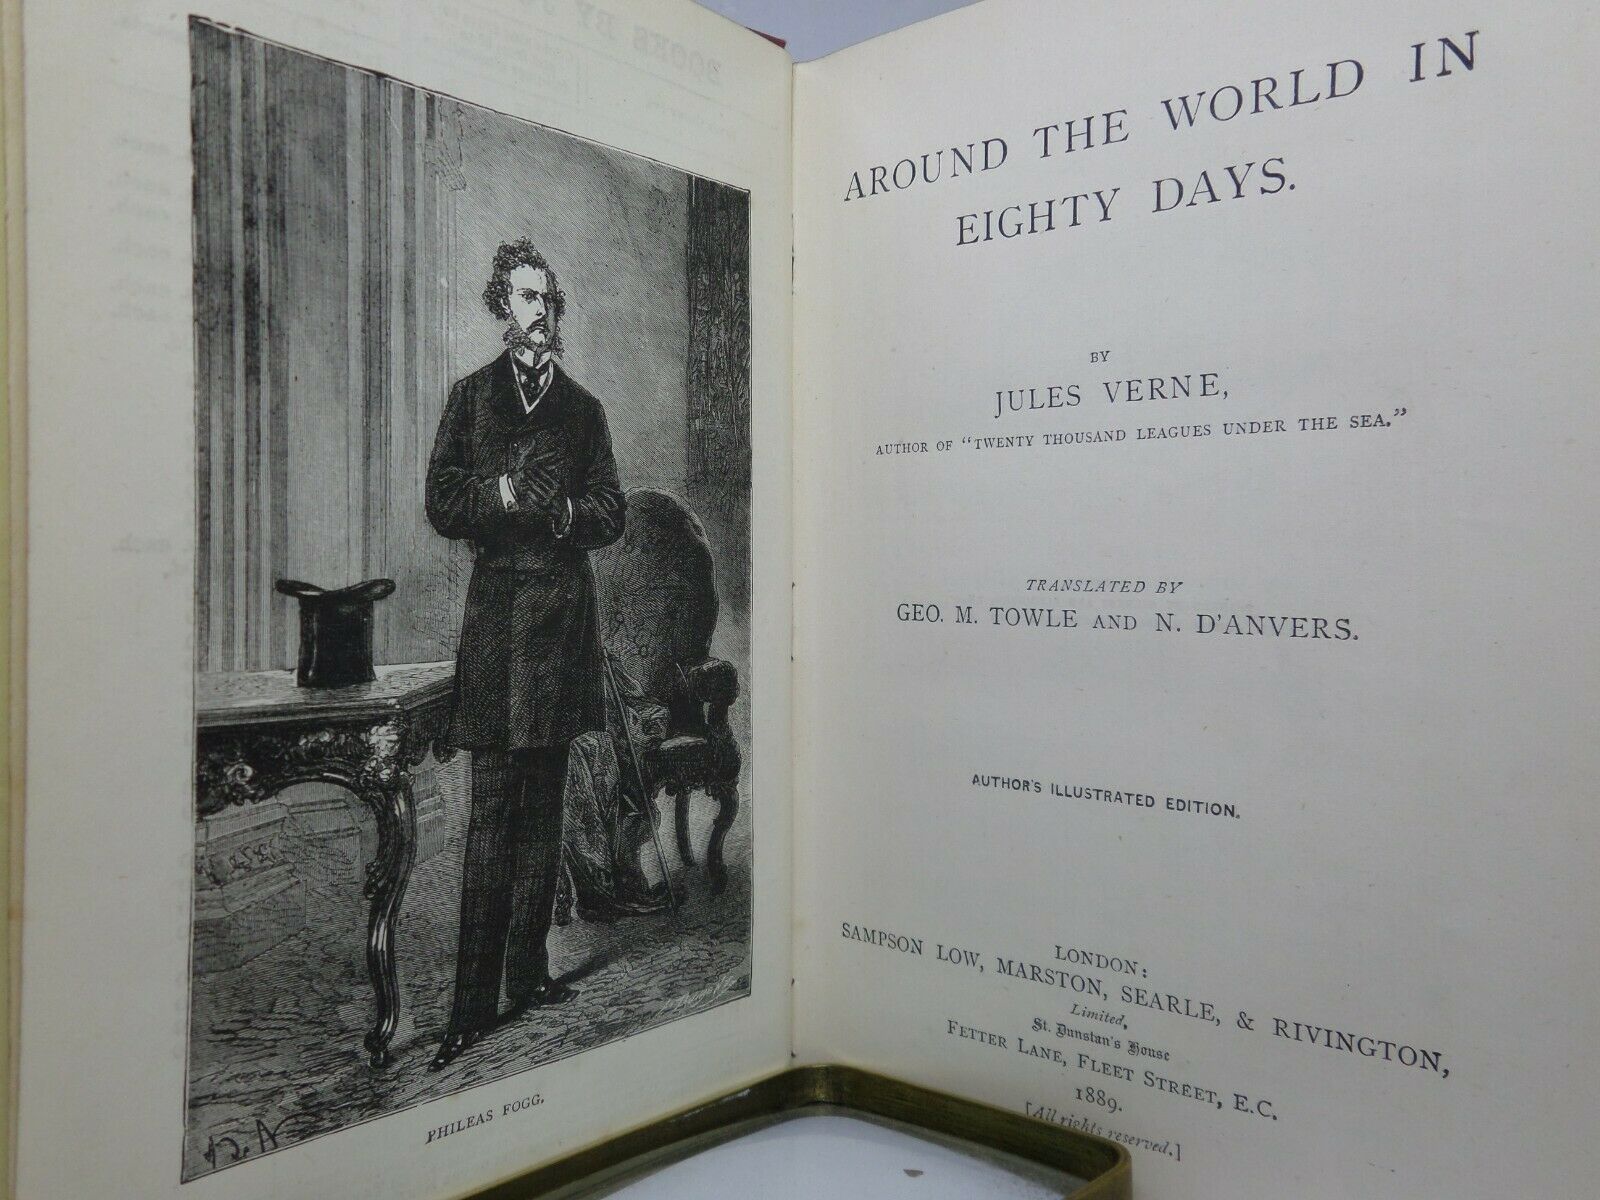 AROUND THE WORLD IN EIGHTY DAYS BY JULES VERNE 1889 AUTHOR'S ILLUSTRATED EDITION